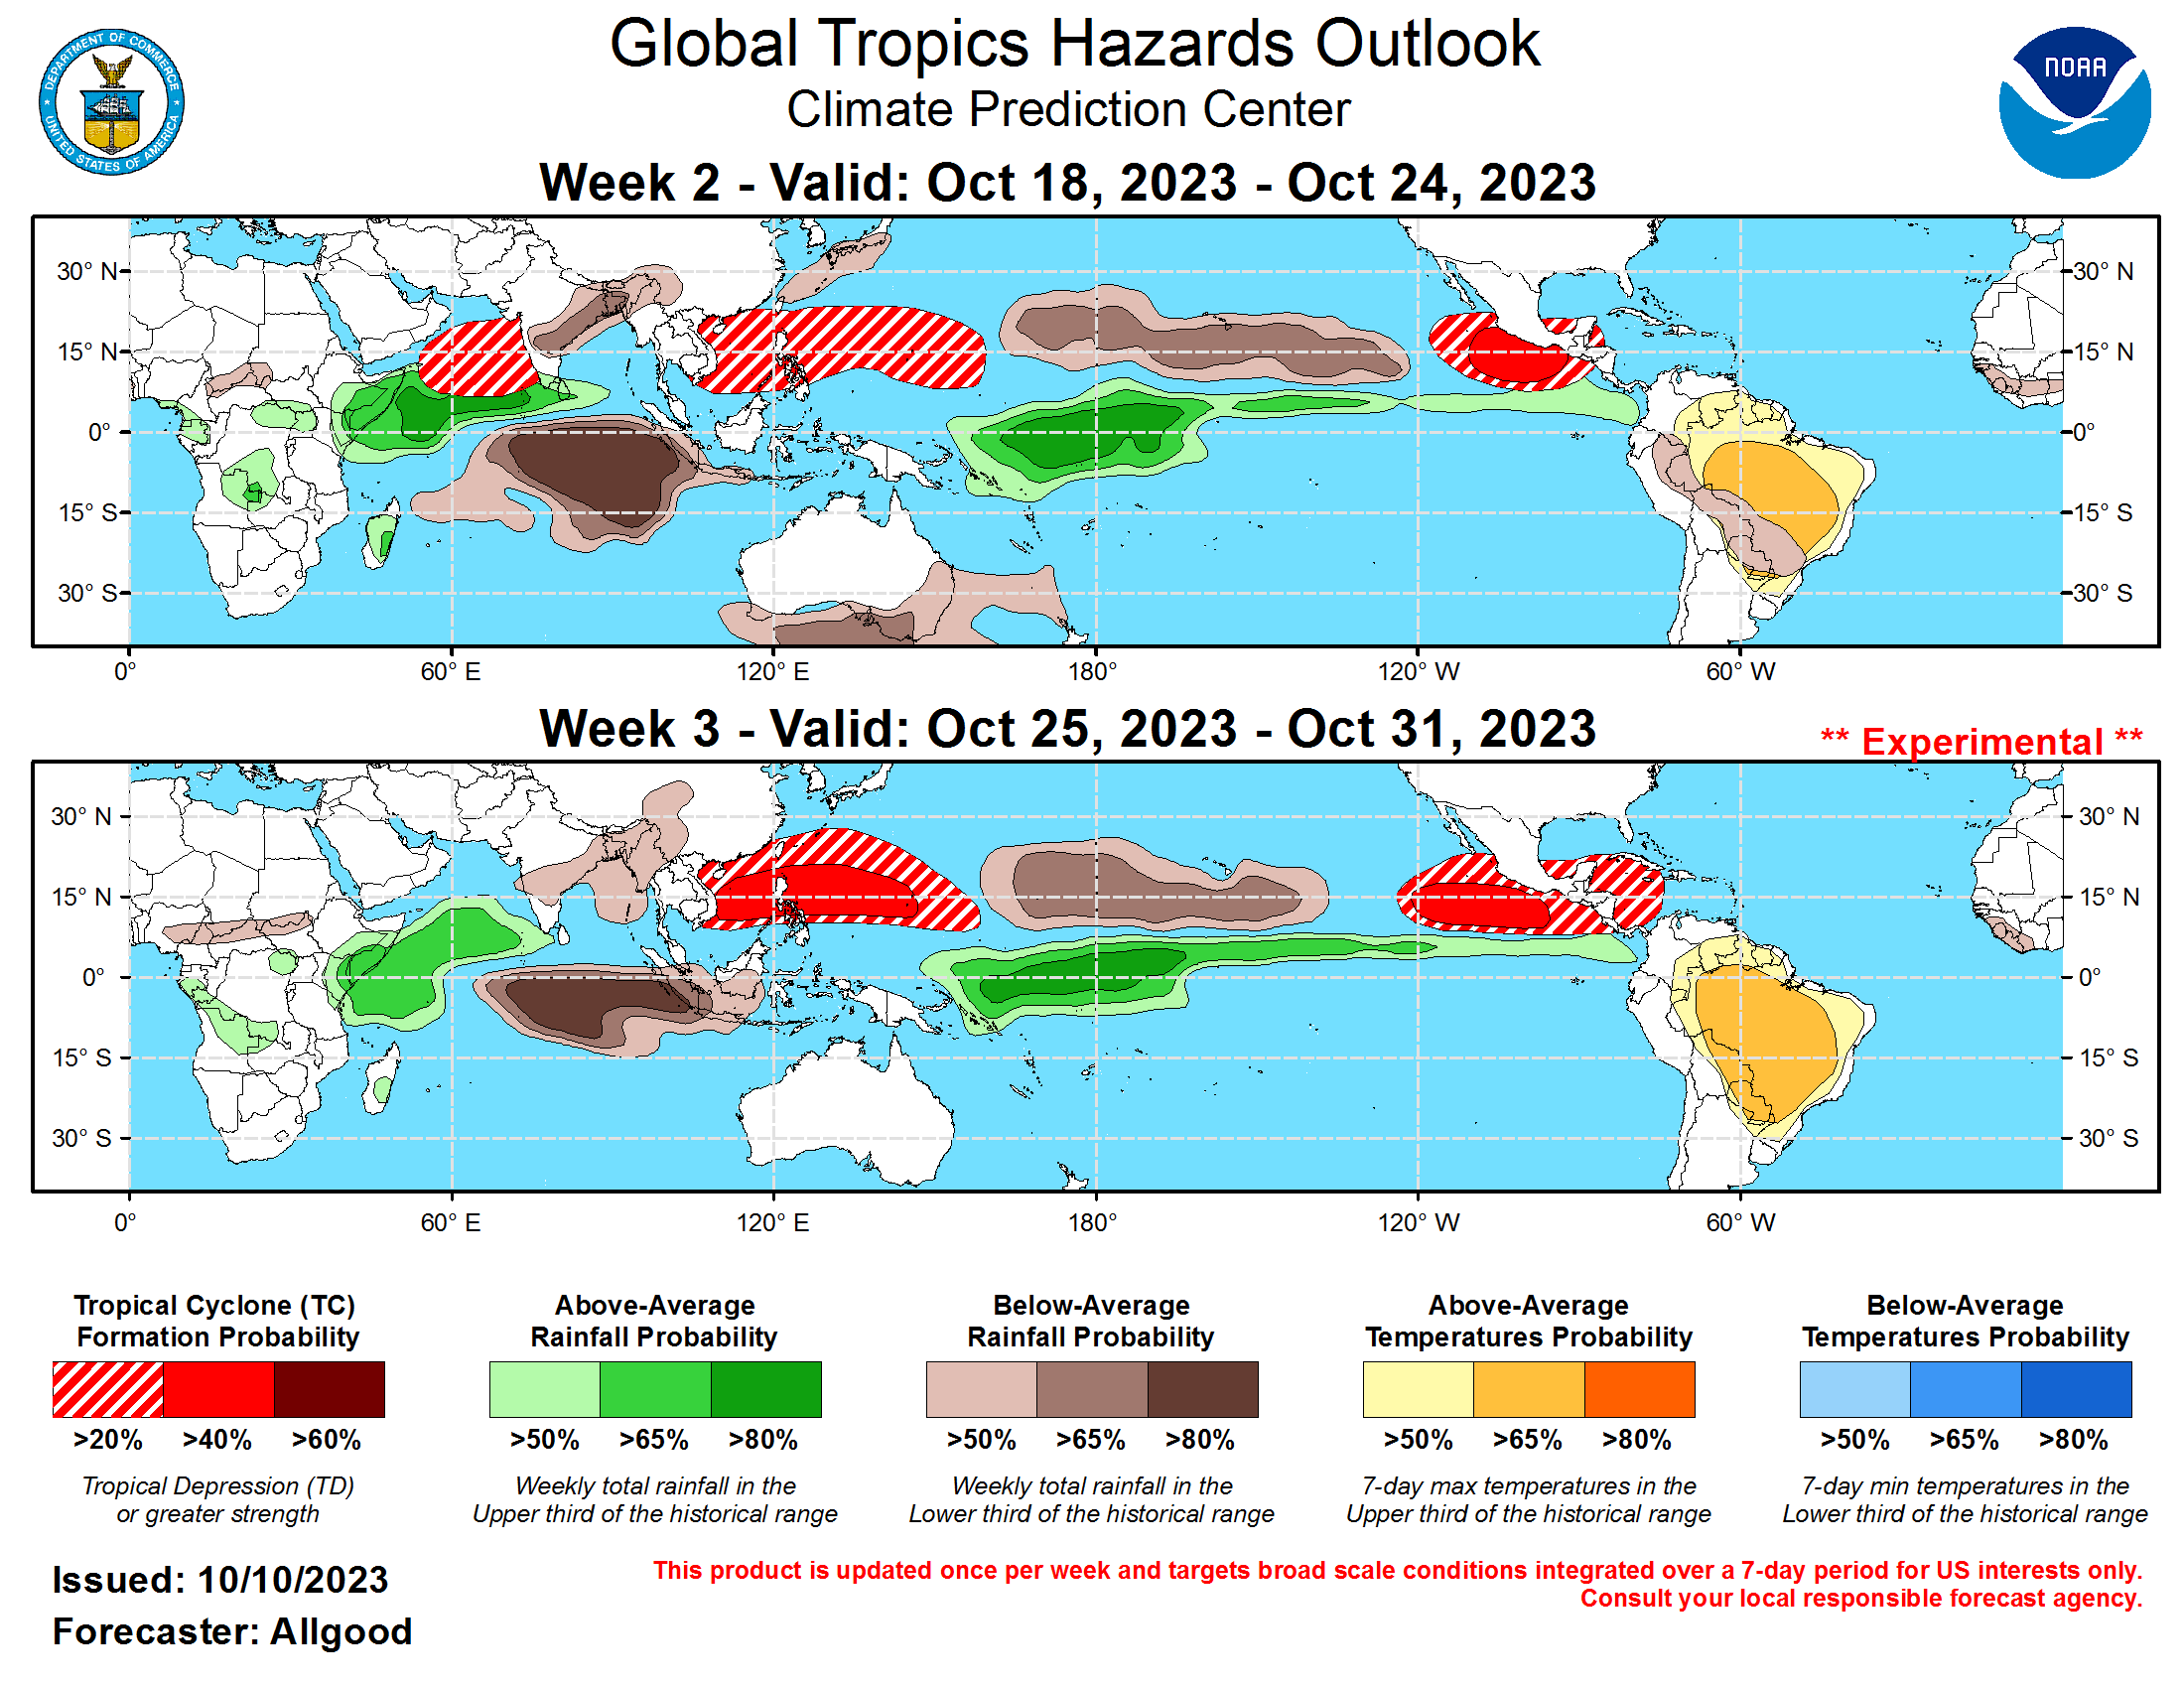 GTH Outlook Discussion Last Updated - 10/10/23 Valid - 10/18/23 - 10/31/23 The Madden-Julian Oscillation (MJO) remains active, with the CPC upper-level velocity potential index depicting a strong event with a phase speed on the high end of the canonical envelope. The RMM-based MJO index has also reflected higher amplitudes over the past several days, and currently places the enhanced phase of the MJO over the Western Hemisphere. The atmospheric response to ongoing El Nino conditions is also playing a substantial role in the global tropical convective pattern, with enhanced convection persisting near and west of the Date Line and a well established subtropical jet stream over the Northeast Pacific extending across the southern tier of the CONUS. Recently, a strong westerly wind burst centered over the Equator was observed over the far West Pacific, associated with a broad monsoonal trough with embedded tropical cyclone activity. This event should promote renewed downwelling oceanic Kelvin wave activity, which would further reinforce or strengthen the ENSO response over the coming weeks to months.  The forecast evolution of the intraseasonal signal is highly uncertain. As the MJO continues propagating eastward, its signal will increasingly interfere destructively with the ENSO base state. Additionally, a strongly positive Indian Ocean Dipole (IOD) event is underway, with above (below)-normal SSTs over the western (eastern) Indian Ocean providing a second stationary signal to interfere with the progression of the MJO. Dynamical model forecasts from the ECMWF show the IOD event growing increasingly dominant, with the suppressed convective signal over the eastern Indian Ocean becoming the highest amplitude signal in the global tropics OLR anomaly field. Therefore, this outlook is based on an anticipated weakening of the MJO over the next several weeks, with the positive IOD and El Nino signals serving as the main drivers of the global tropical convective pattern. The resulting Global Tropics Hazards (GTH) Outlook therefore reflects a broadly stationary signal during Weeks 2 and 3.  Hurricane Lidia, which formed just prior to the issuance of last week’s GTH outlook, turned east-northeastward while intensifying and is currently forecast to make landfall over the west-central coastline of Mexico, bringing significant wind, rain, and storm surge impacts. Tropical Storm Max formed just off the coast of southern Mexico on October 9, quickly making landfall and dissipating. Over the West Pacific, Typhoon Bolaven is currently passing just north of Guam, and is forecast to continue intensifying before recurving over the northern Pacific, eventually becoming a potent extratropical storm and likely influencing the midlatitude pattern over North America. Over the next week, the Atlantic main development region (MDR) is anticipated to remain unusually active for mid-October, with the National Hurricane Center (NHC) depicting a high probability for new tropical cyclone development. Dynamical model forecasts have shown the basin becoming increasingly quiet during Week-2, though additional development cannot be ruled out given the abnormally warm SSTs in the region. The East Pacific is favored to remain active during Weeks 2 and 3, while increasing Central American Gyre activity may also increasingly favor genesis over the western Caribbean or southern Gulf of Mexico by Week-3. While the signal favoring development is rather strong over the western Caribbean by Week-3, confidence is somewhat reduced due to a potential for subsidence from any East Pacific tropical cyclone activity. Elsewhere, tropical cyclone activity is possible across the West Pacific, with the strongest signal in the dynamical model guidance over the South China Sea and in the vicinity of the Philippines. Additionally, dynamical models favor potential formation over the Arabian Sea during Week-2.  The precipitation outlook for the next two weeks is based on the anticipated dominance of the stationary IOD and El Nino signals, and a consensus of GEFS, CFS, Canadian, and ECMWF ensemble mean solutions. Therefore, above (below) average precipitation is favored for the western (eastern) Indian Ocean, and the central and eastern Pacific. A continued hot, somewhat dry pattern is favored for much of northern South America, which will increasingly stress crops undergoing reproduction. For hazardous weather conditions in your area during the coming two-week period, please refer to your local NWS office, the Medium Range Hazards Forecast produced by the Weather Prediction Center, and the CPC Week-2 Hazards Outlook. Forecasts made over Africa are made in coordination with the International Desk at CPC.